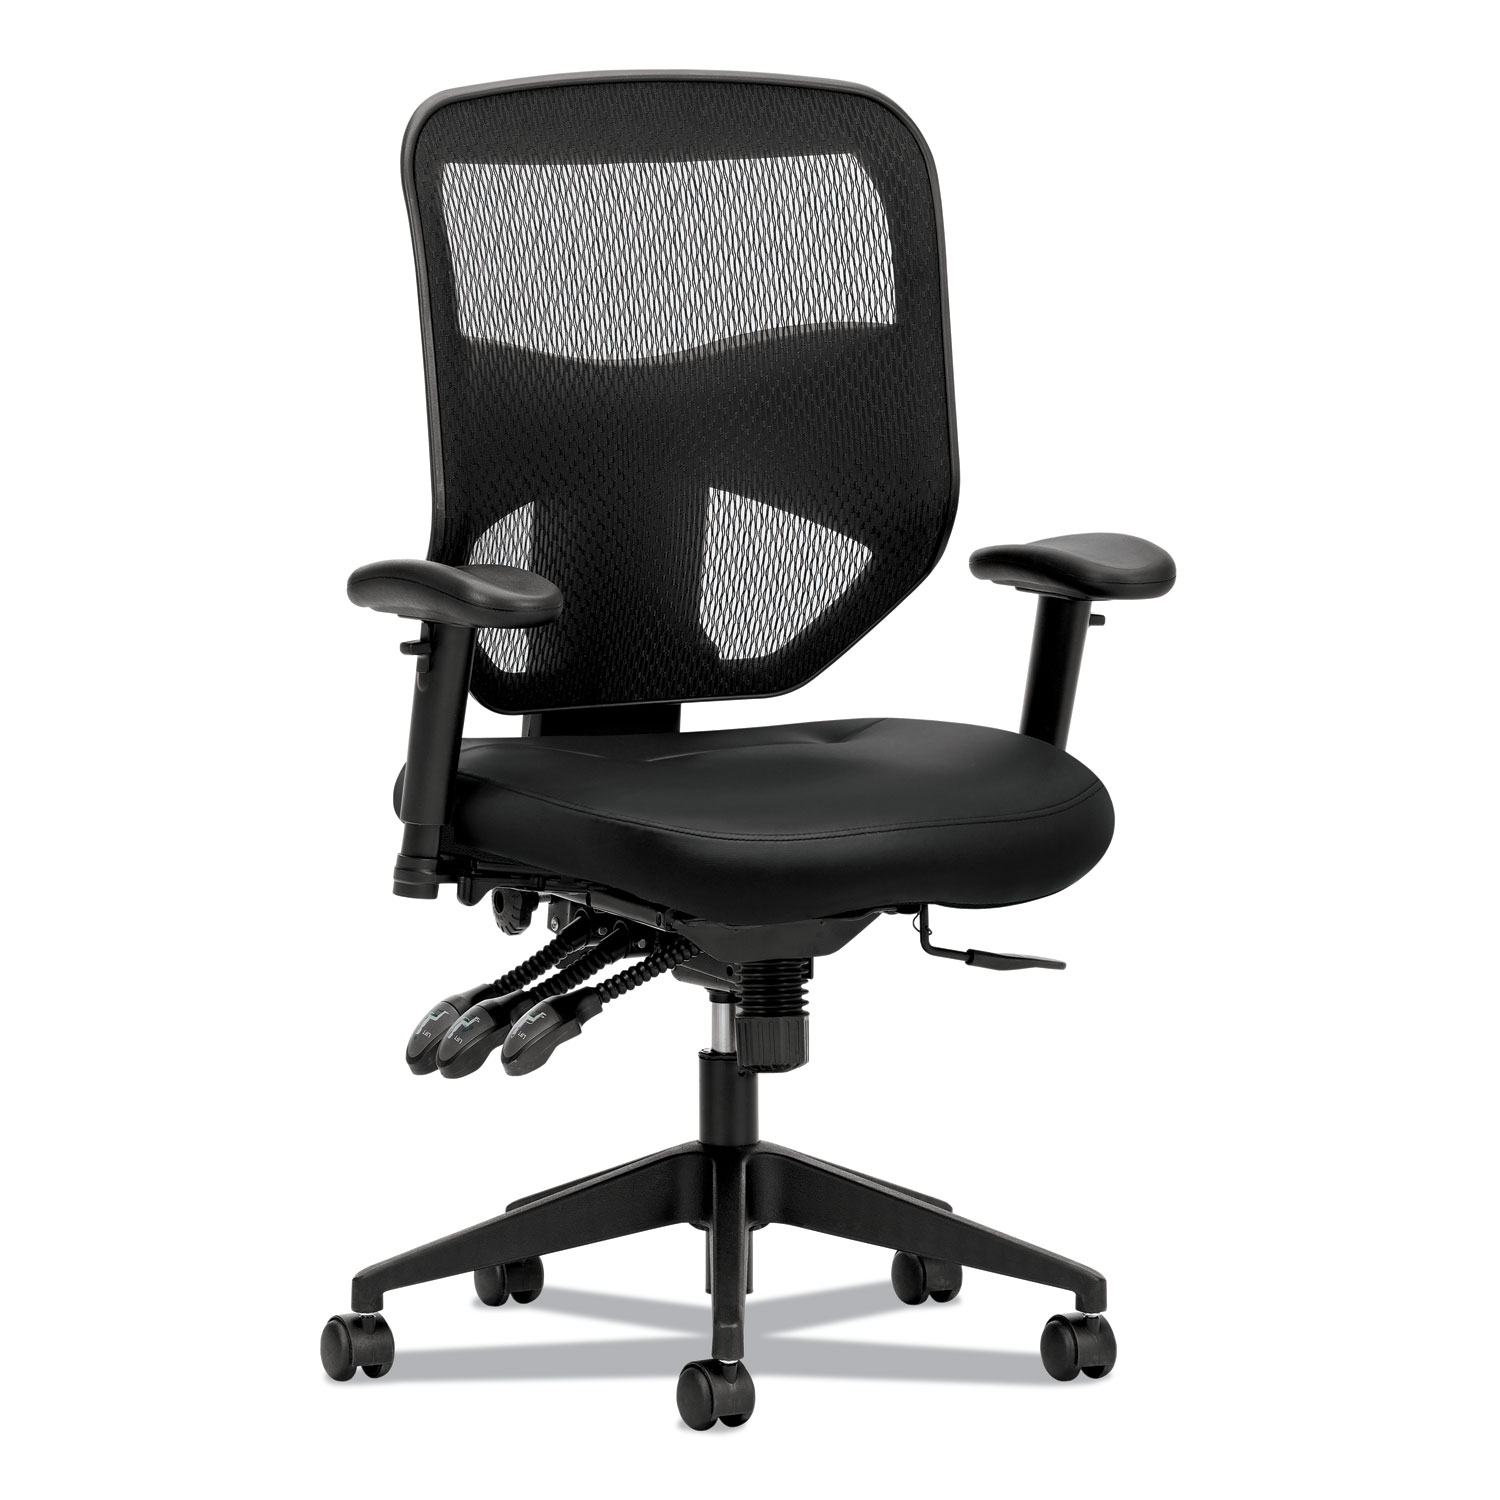  HON BSXVL532SB11 Prominent Mesh High-Back Task Chair, Leather, Supports up to 250 lbs., Black Seat, Black Back, Black Base (BSXVL532SB11) 